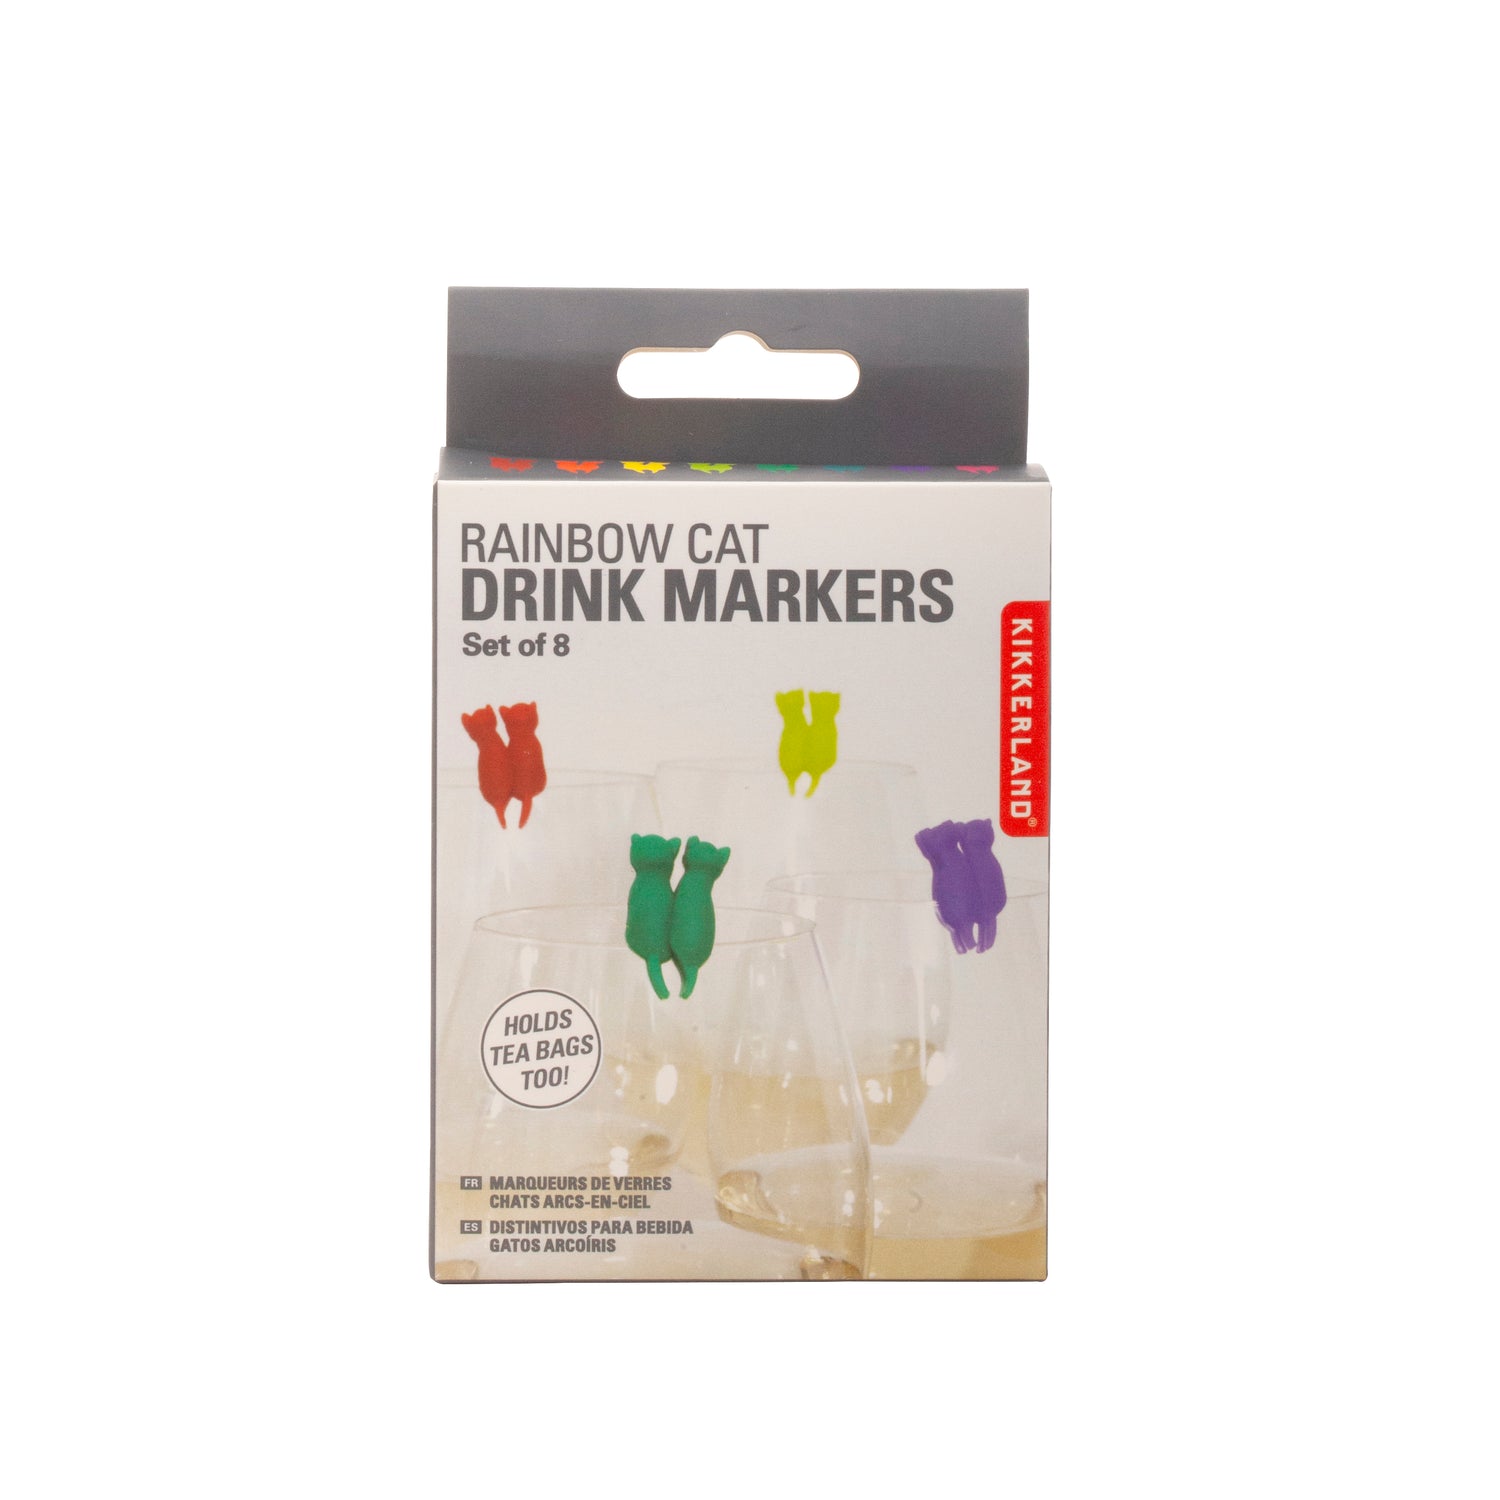 Drink Markers Silicone Glass Markers Party People / Charms set of